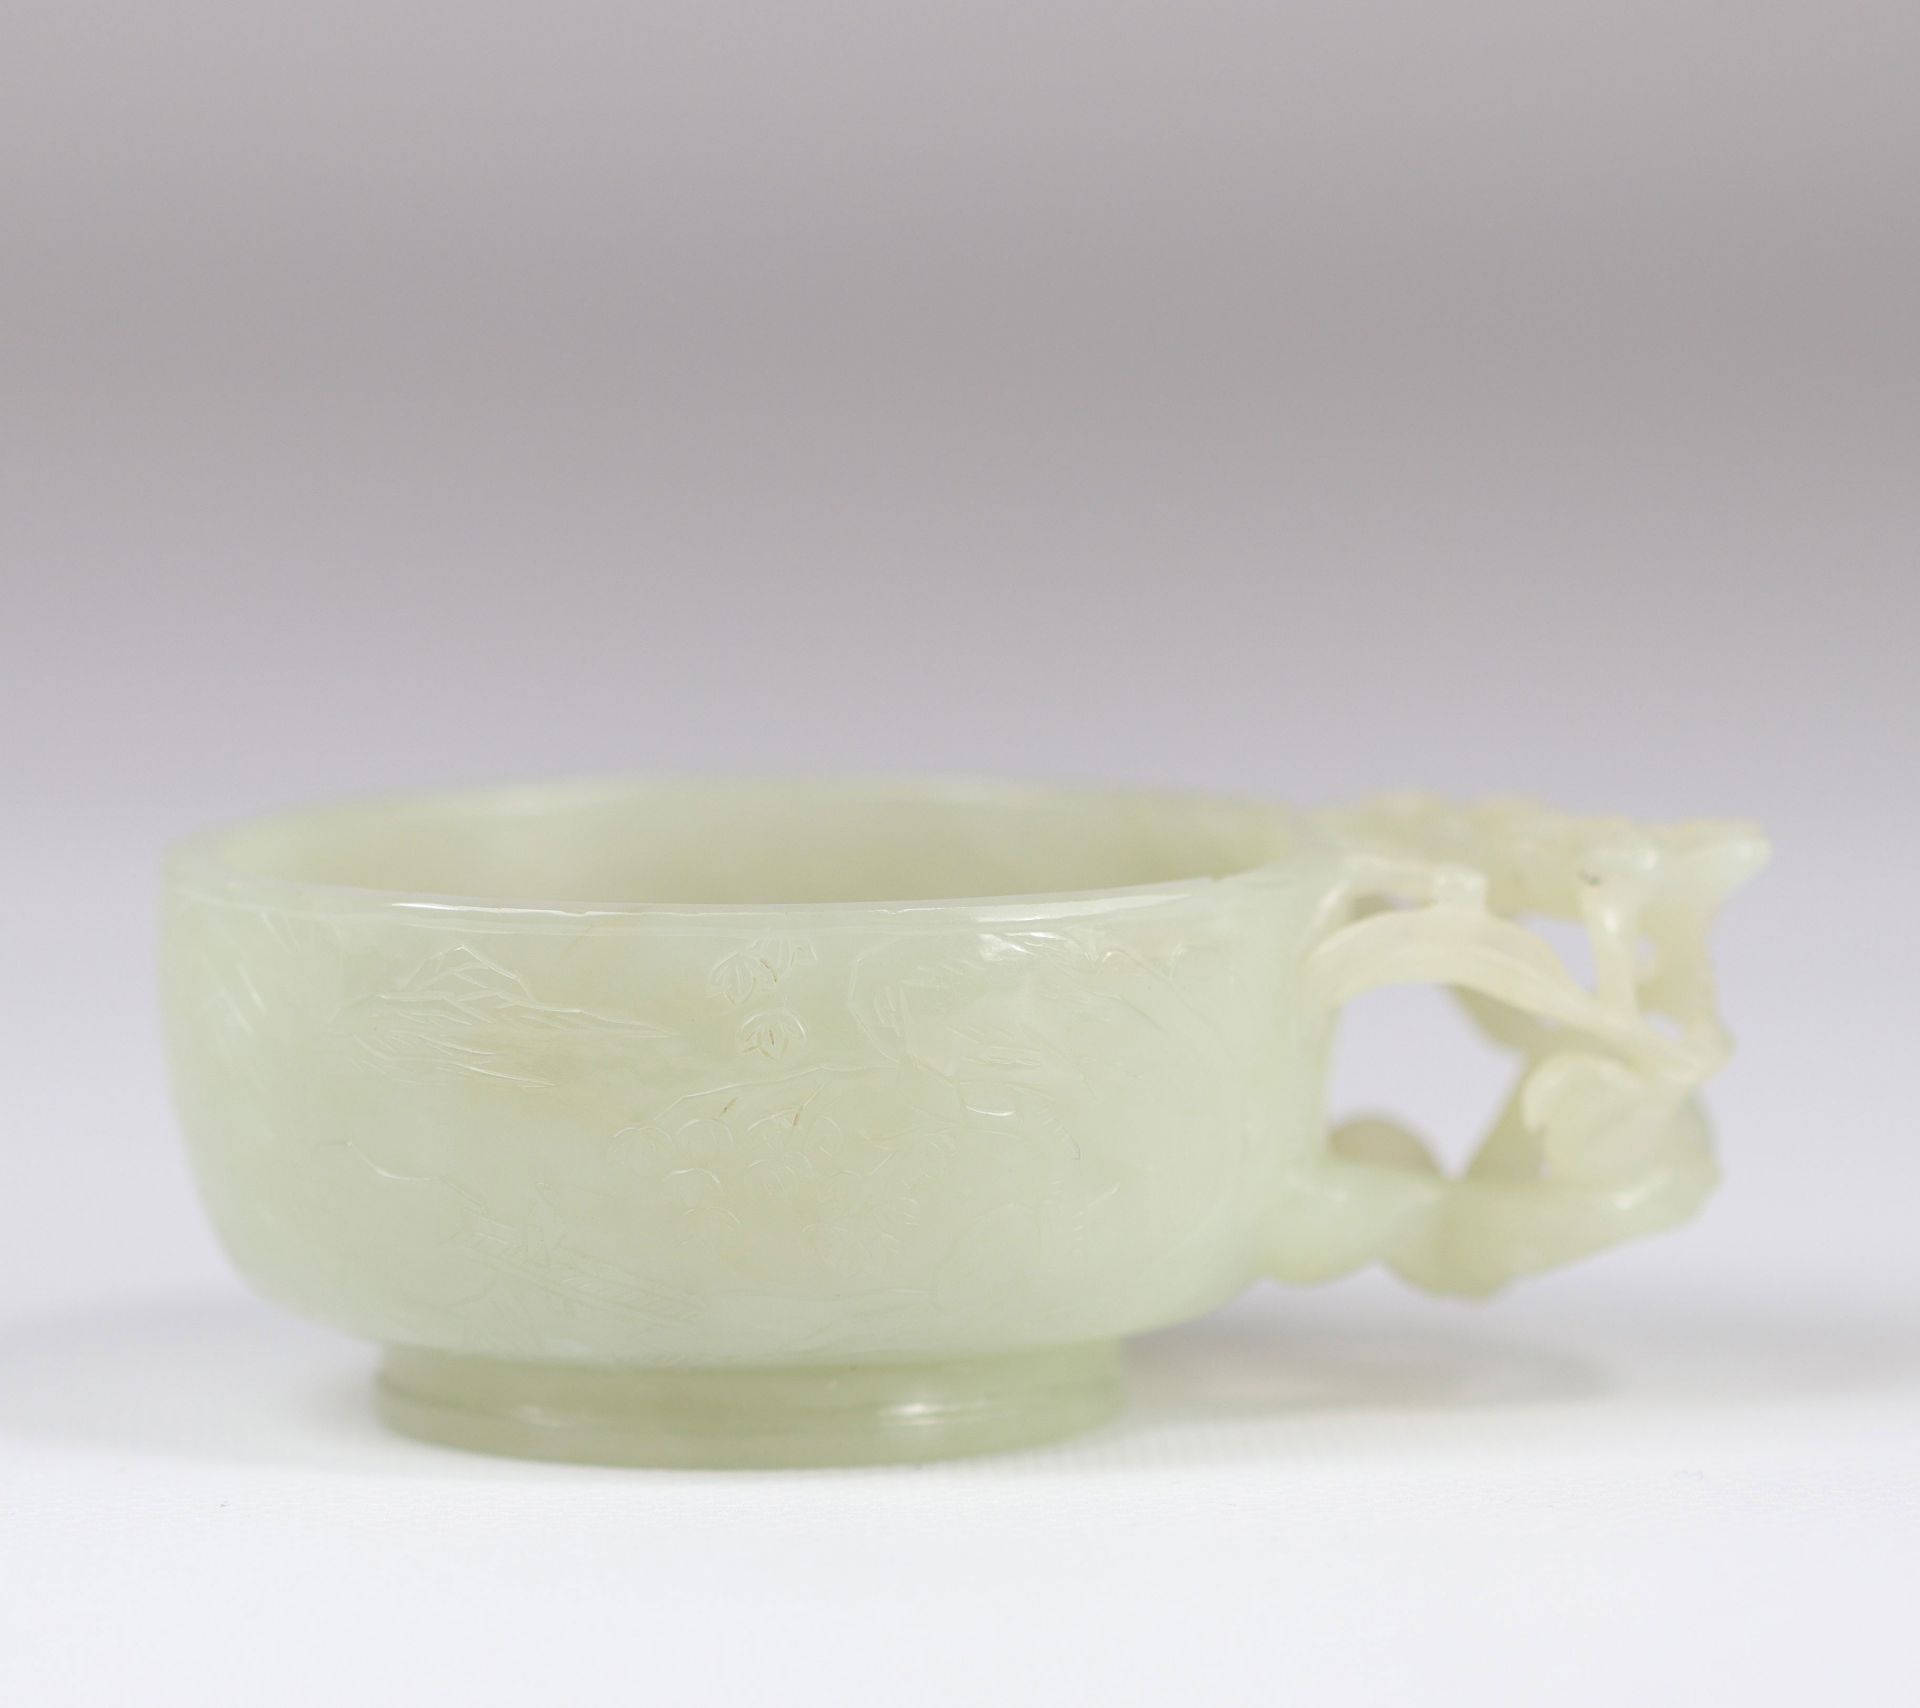 White jade water pot with vegetable decoration, Qing dynasty China - Image 5 of 10